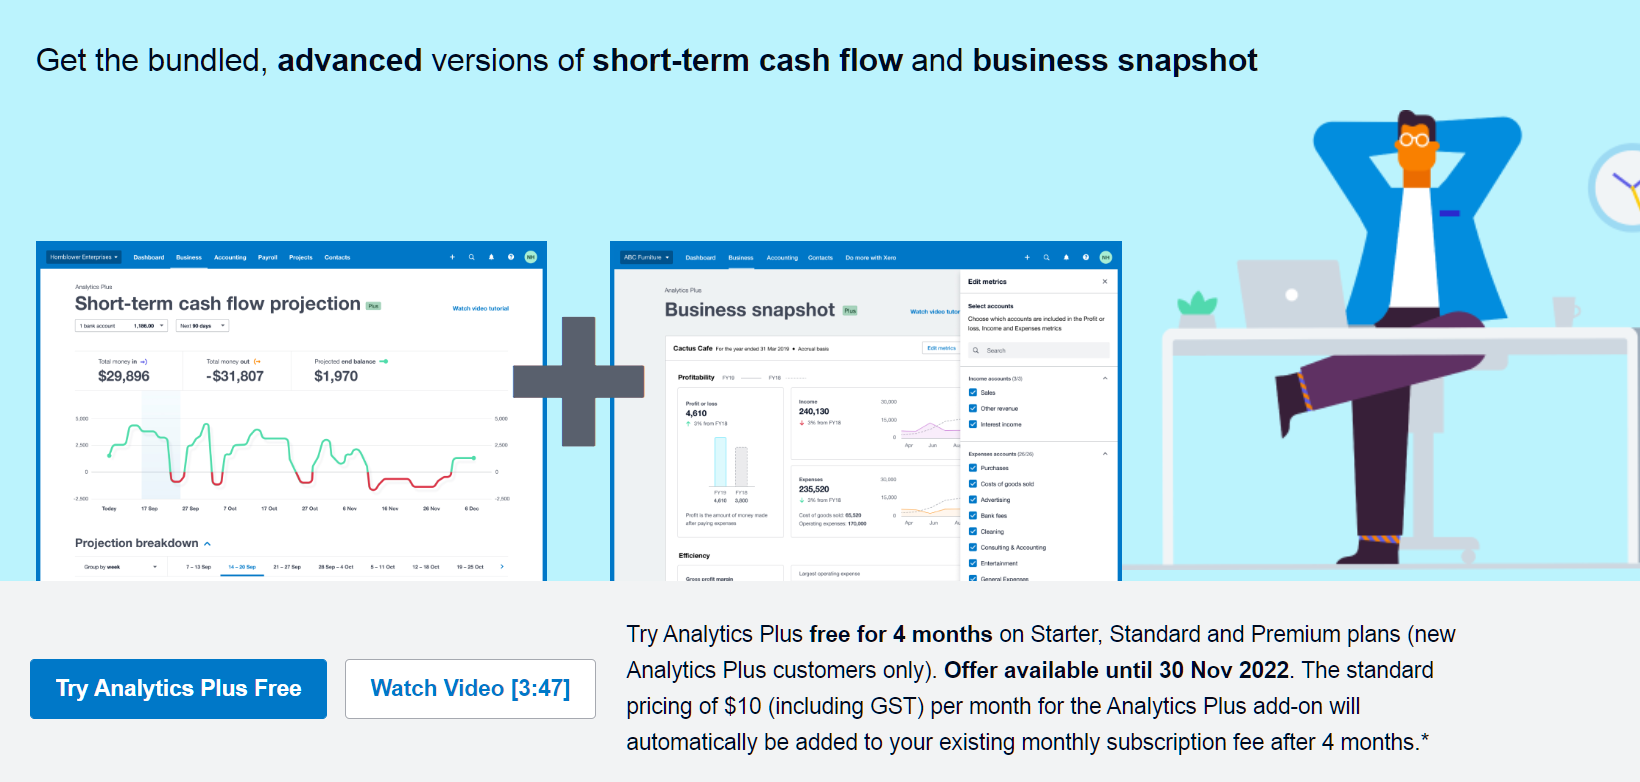 Xero-Analytics-Plus-is-a-paid-subscription-for-Short-Term-Cashflow-Projection-Online-Bookkeeping-Training-Courses-Certification-in-Xero